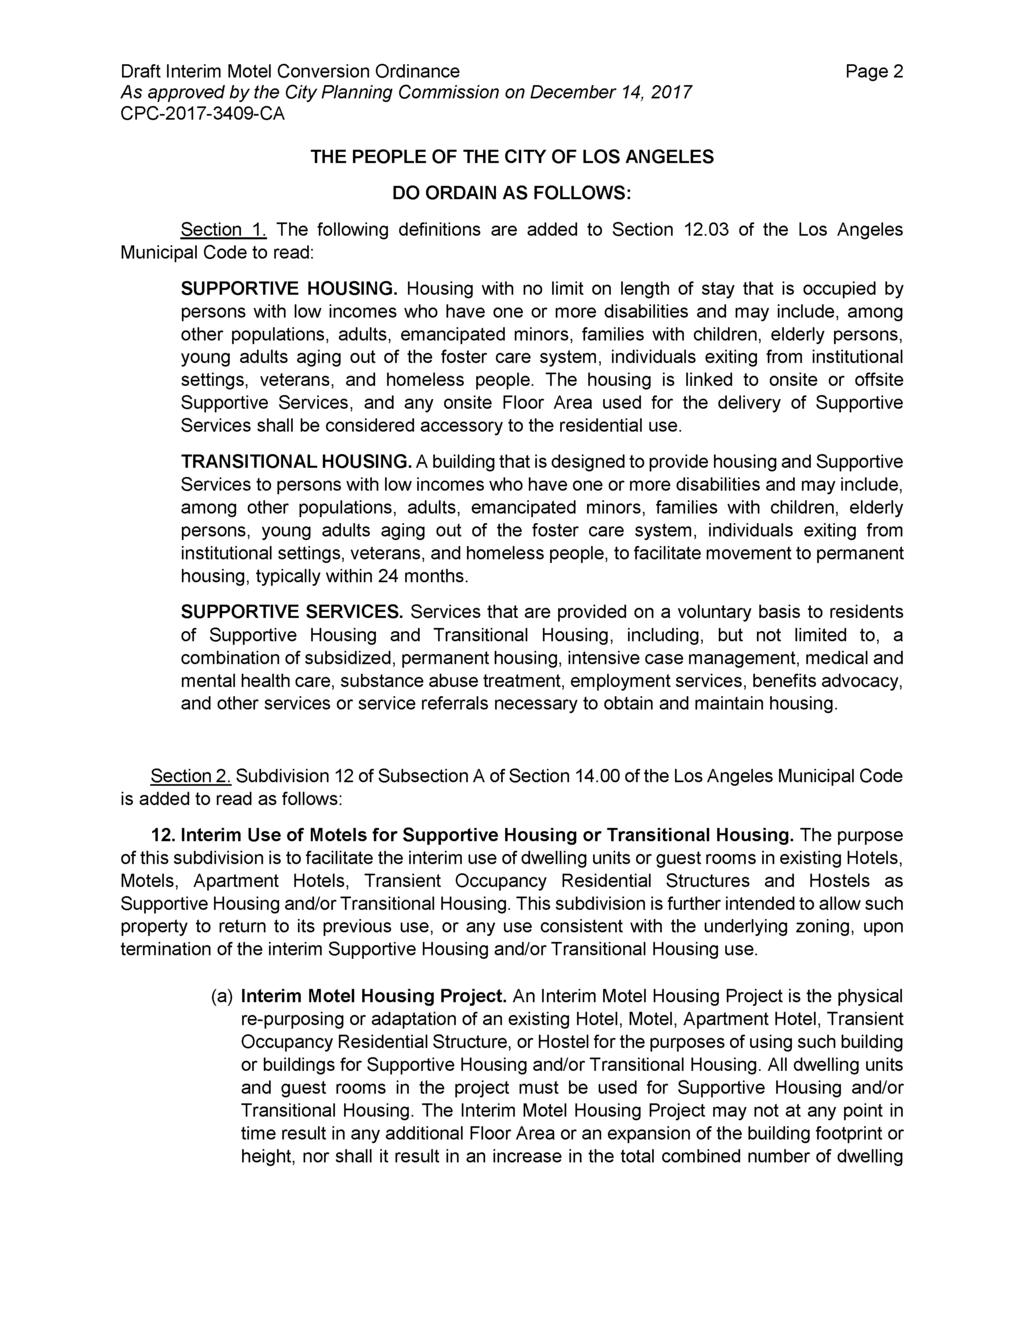 Page 2 THE PEOPLE OF THE CITY OF LOS ANGELES DO ORDAIN AS FOLLOWS: Section 1. The following definitions are added to Section 12.03 of the Los Angeles Municipal Code to read: SUPPORTIVE HOUSING.